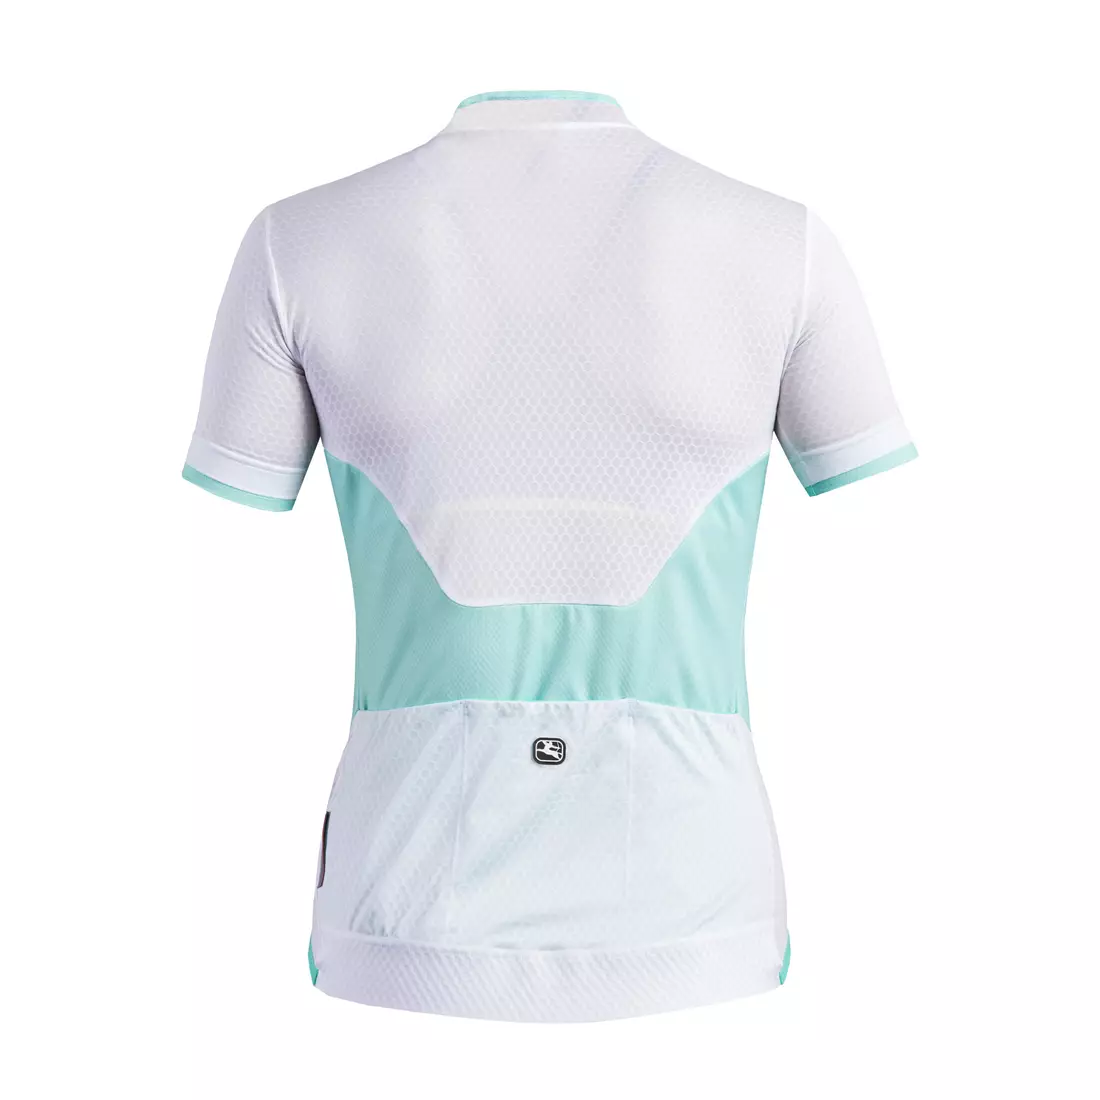 GIORDANA SILVERLINE women's cycling jersey, mint and white